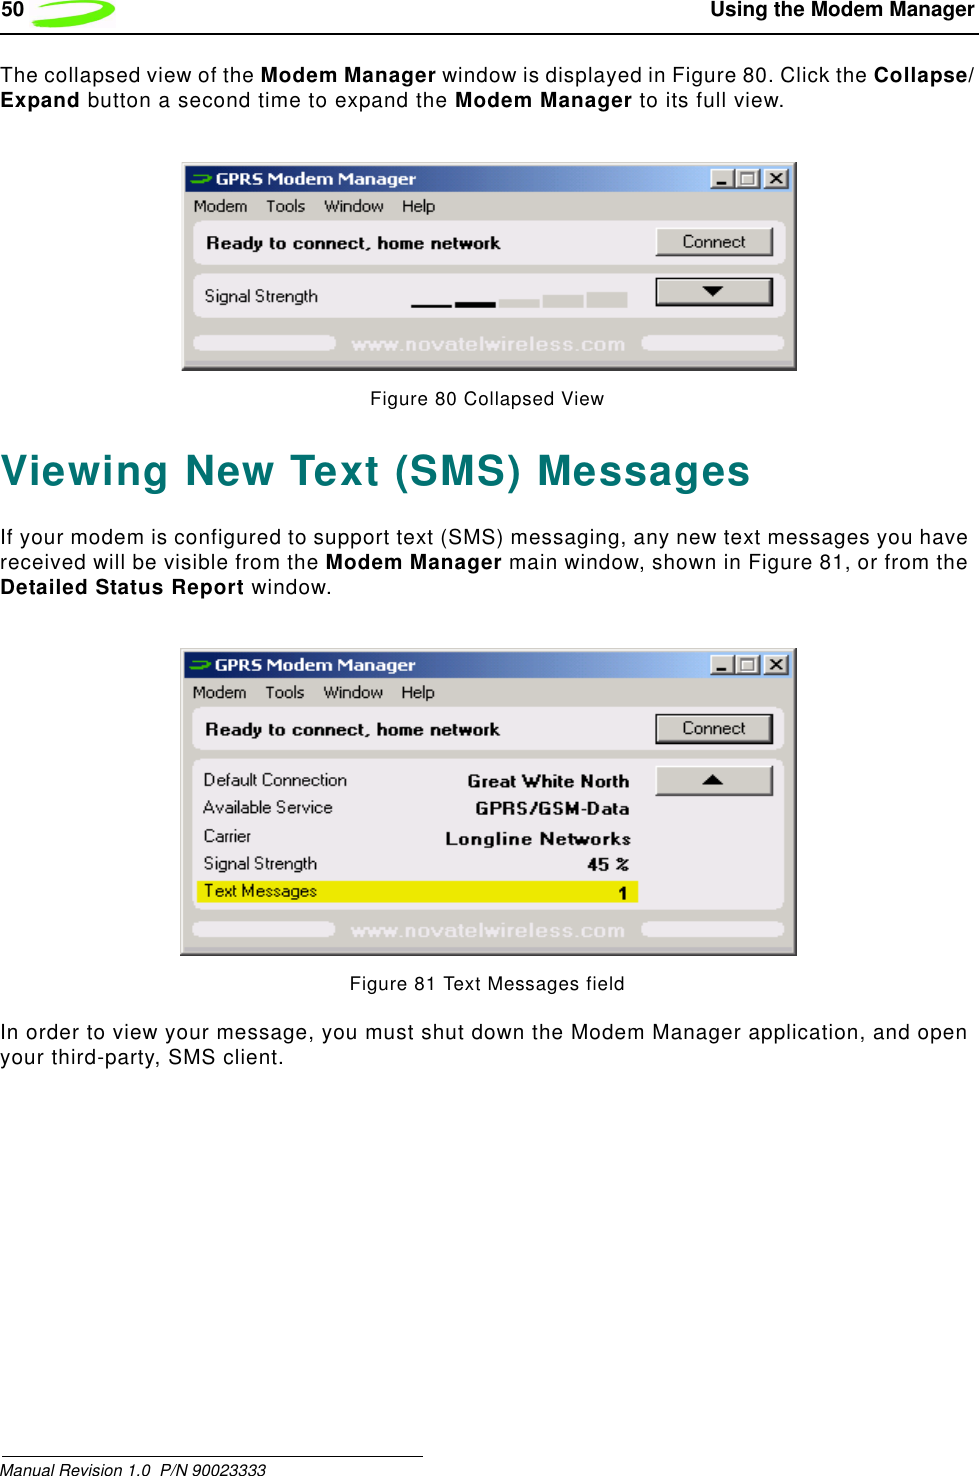 50  Using the Modem ManagerManual Revision 1.0  P/N 90023333The collapsed view of the Modem Manager window is displayed in Figure 80. Click the Collapse/Expand button a second time to expand the Modem Manager to its full view.Figure 80 Collapsed ViewViewing New Text (SMS) MessagesIf your modem is configured to support text (SMS) messaging, any new text messages you have received will be visible from the Modem Manager main window, shown in Figure 81, or from the Detailed Status Report window. Figure 81 Text Messages fieldIn order to view your message, you must shut down the Modem Manager application, and open your third-party, SMS client. 